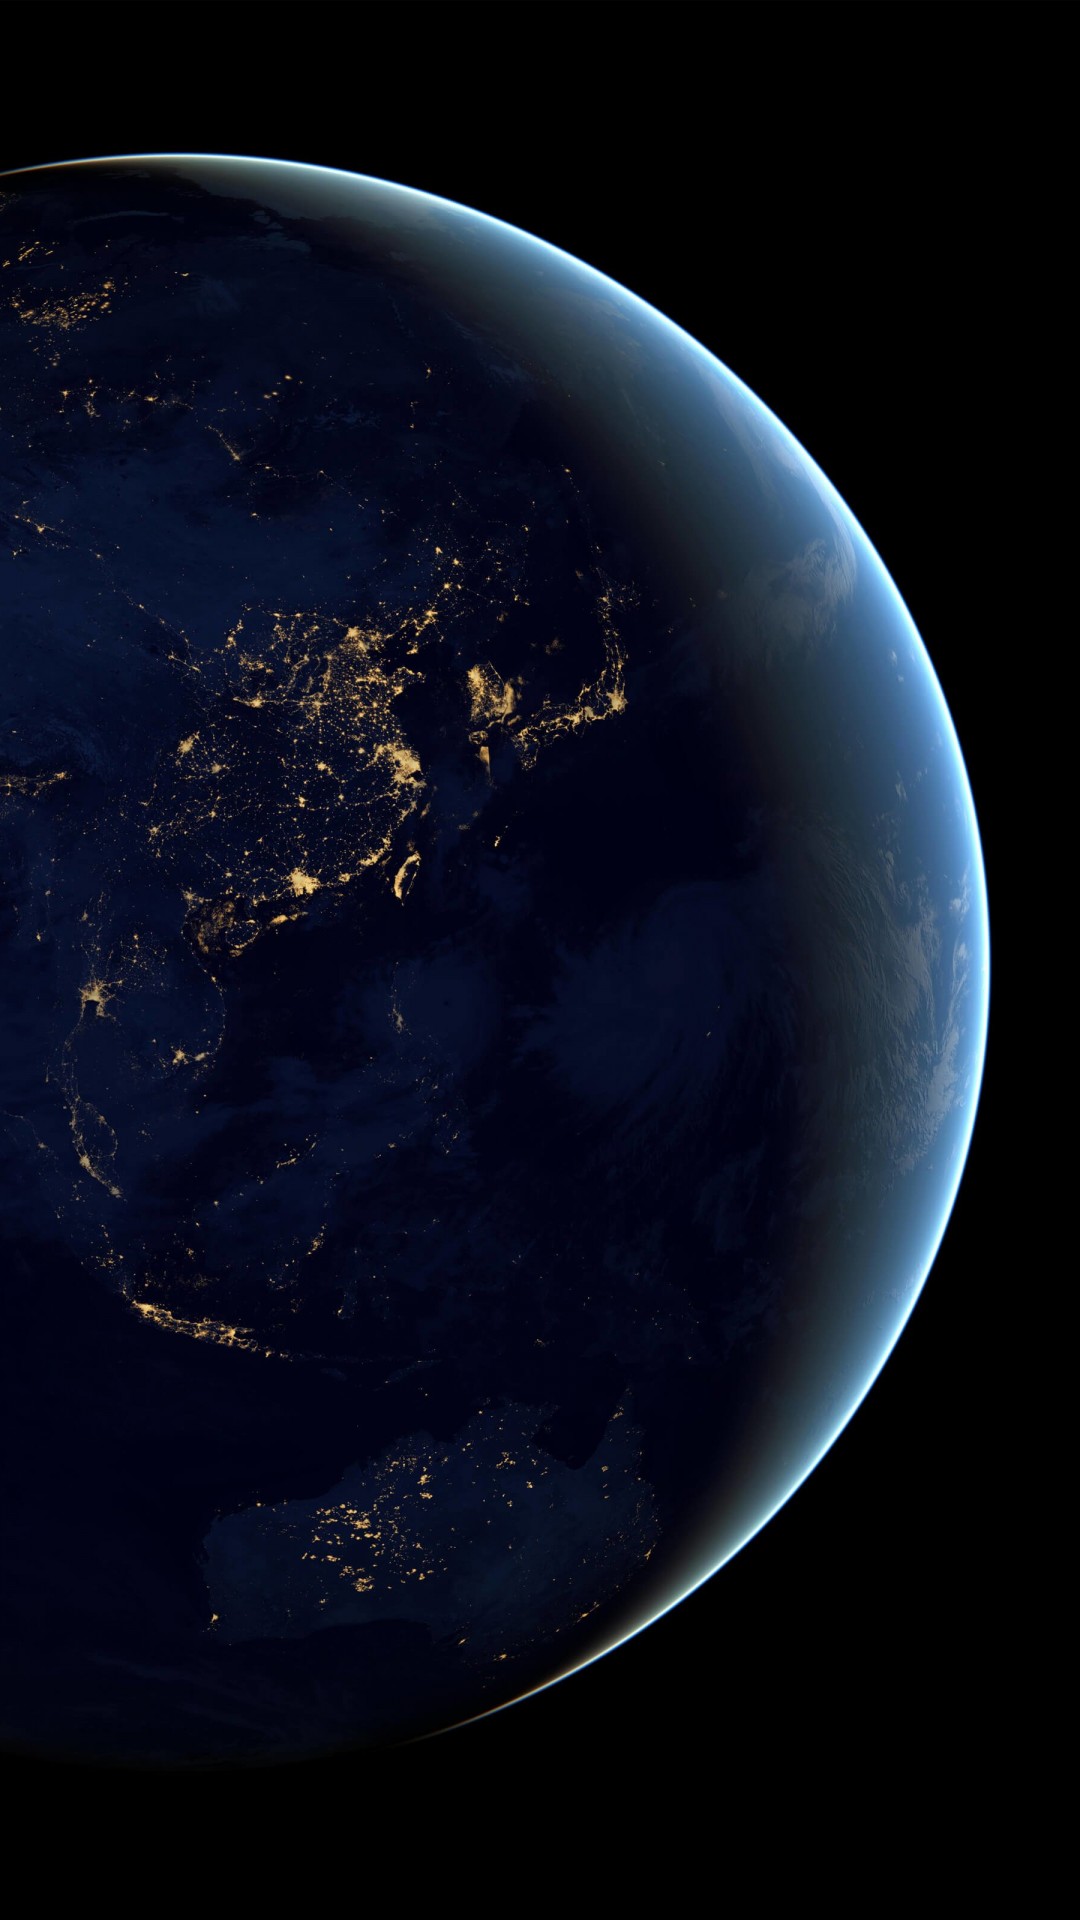 Earth At Night Seen From Space Wallpaper for SAMSUNG Galaxy Note 3